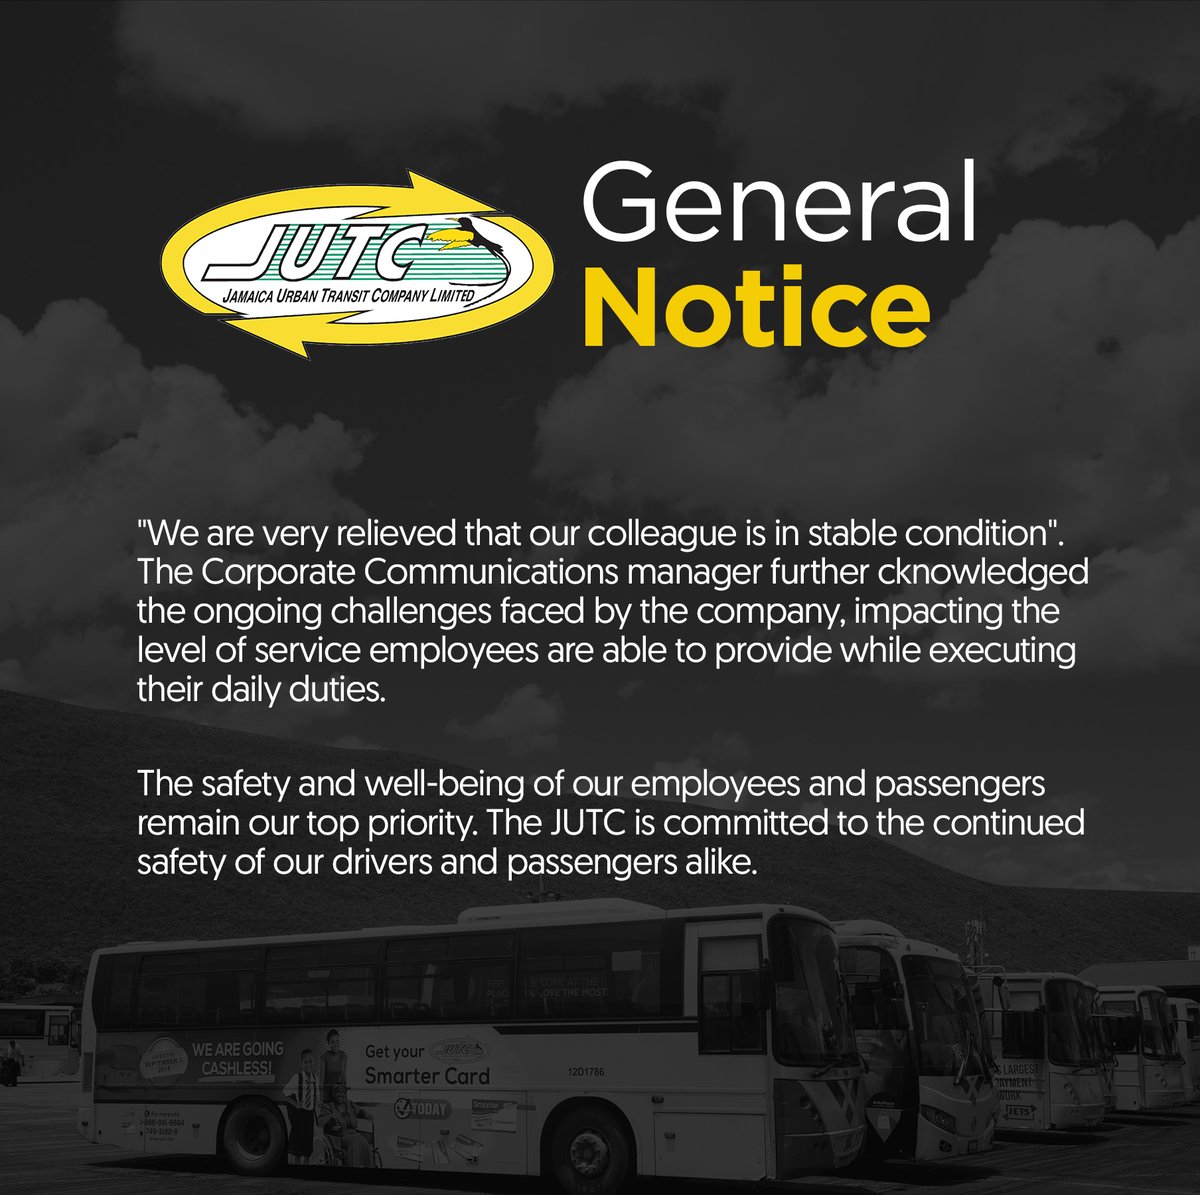 🚌 Service Update: The JUTC resumes operations on the Portmore/Downtown route. We're committed to restoring essential transportation services for our community. Additionally, we're relieved to inform you that our injured driver is now in stable condition.